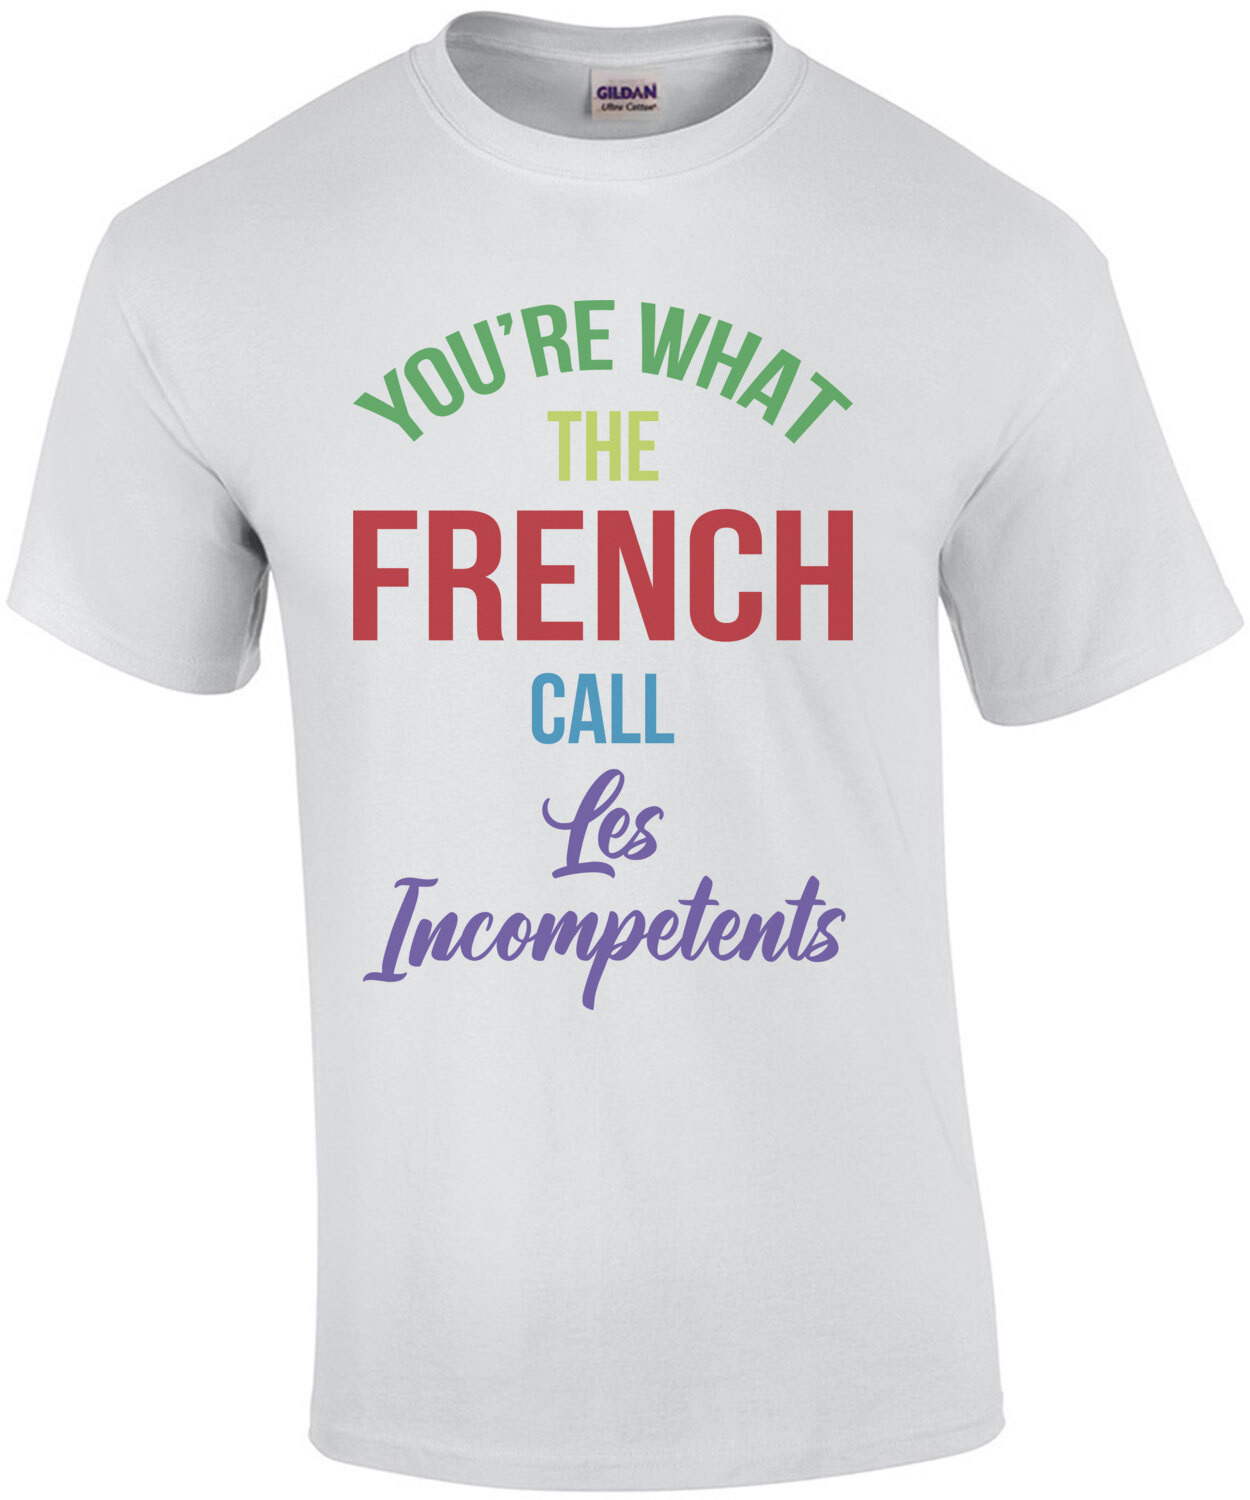 You're what the French call Les Incompetents - Home Alone - Funny Christmas T-Shirt